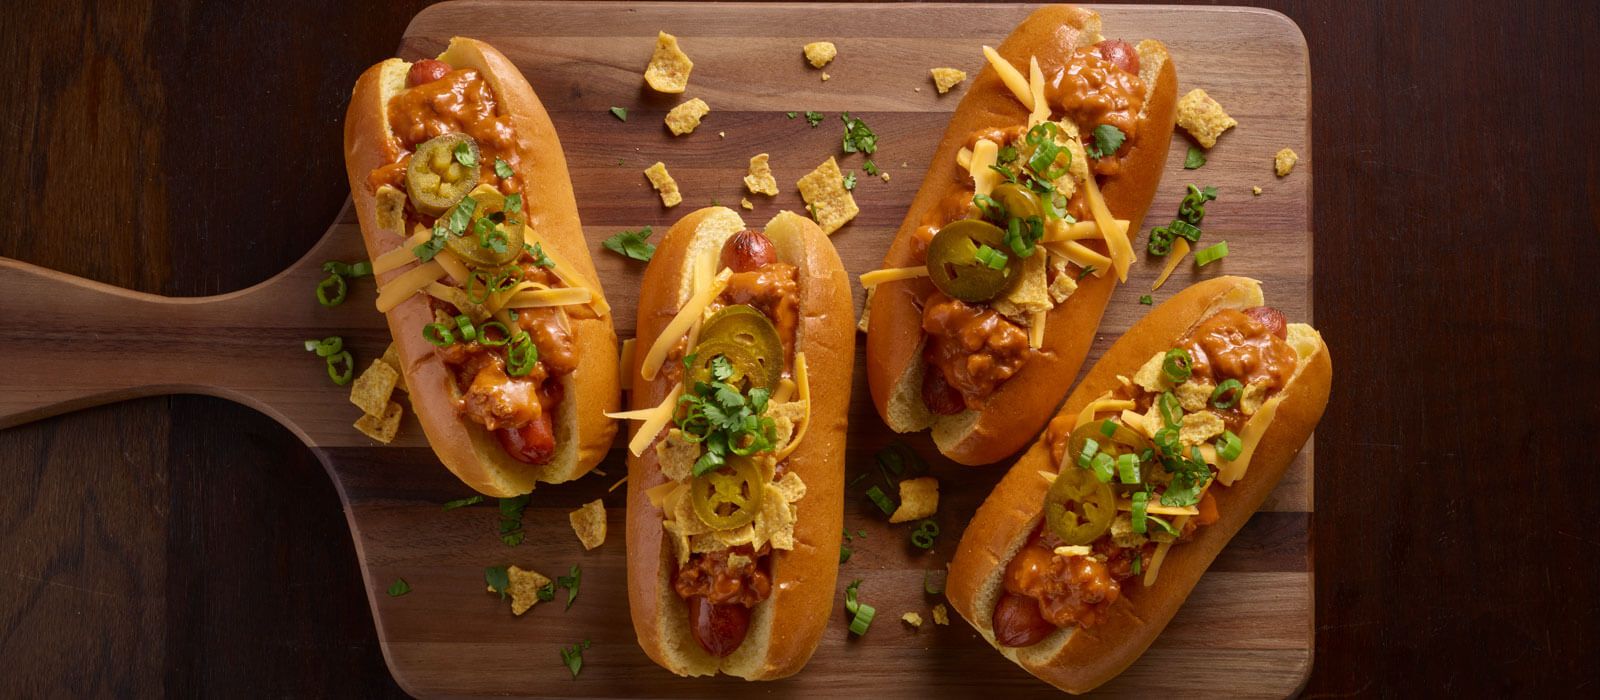 Hot dogs on wood cutting board topped with chili, jalapenos, cheese and chips